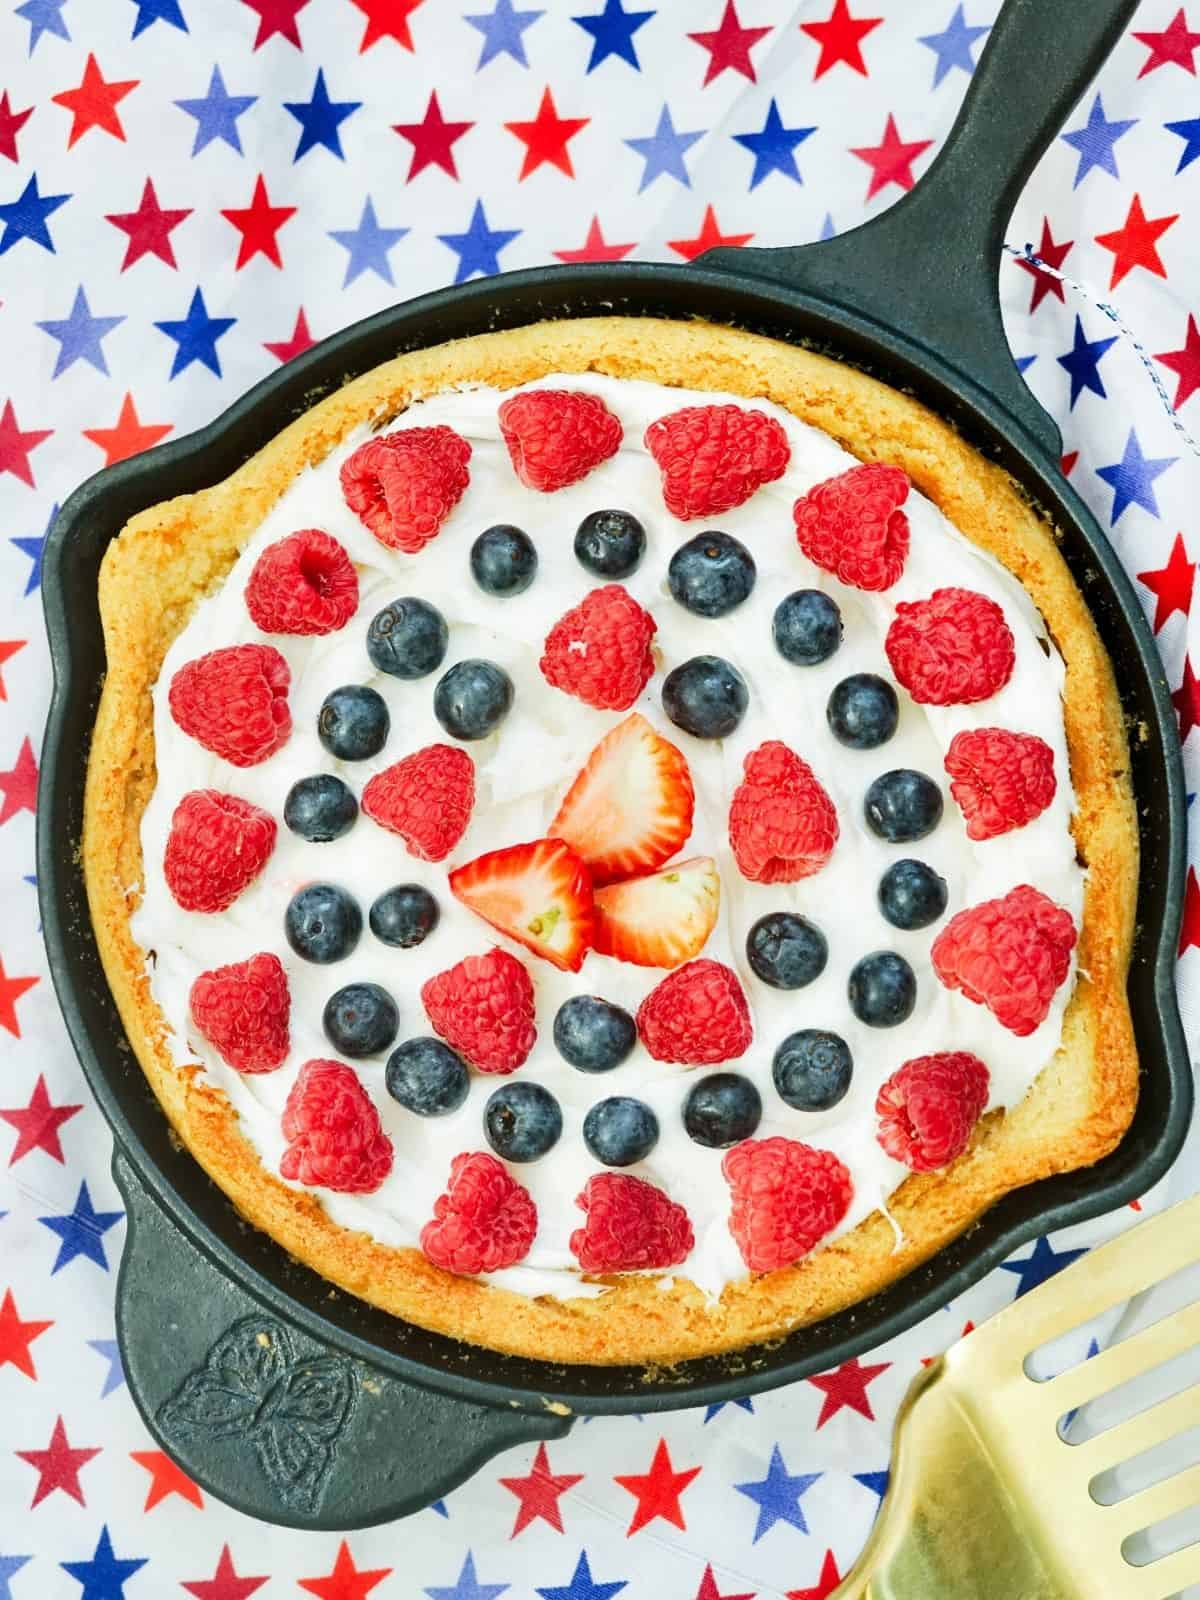 Patriotic cookie cake baked in cast iron skillet.